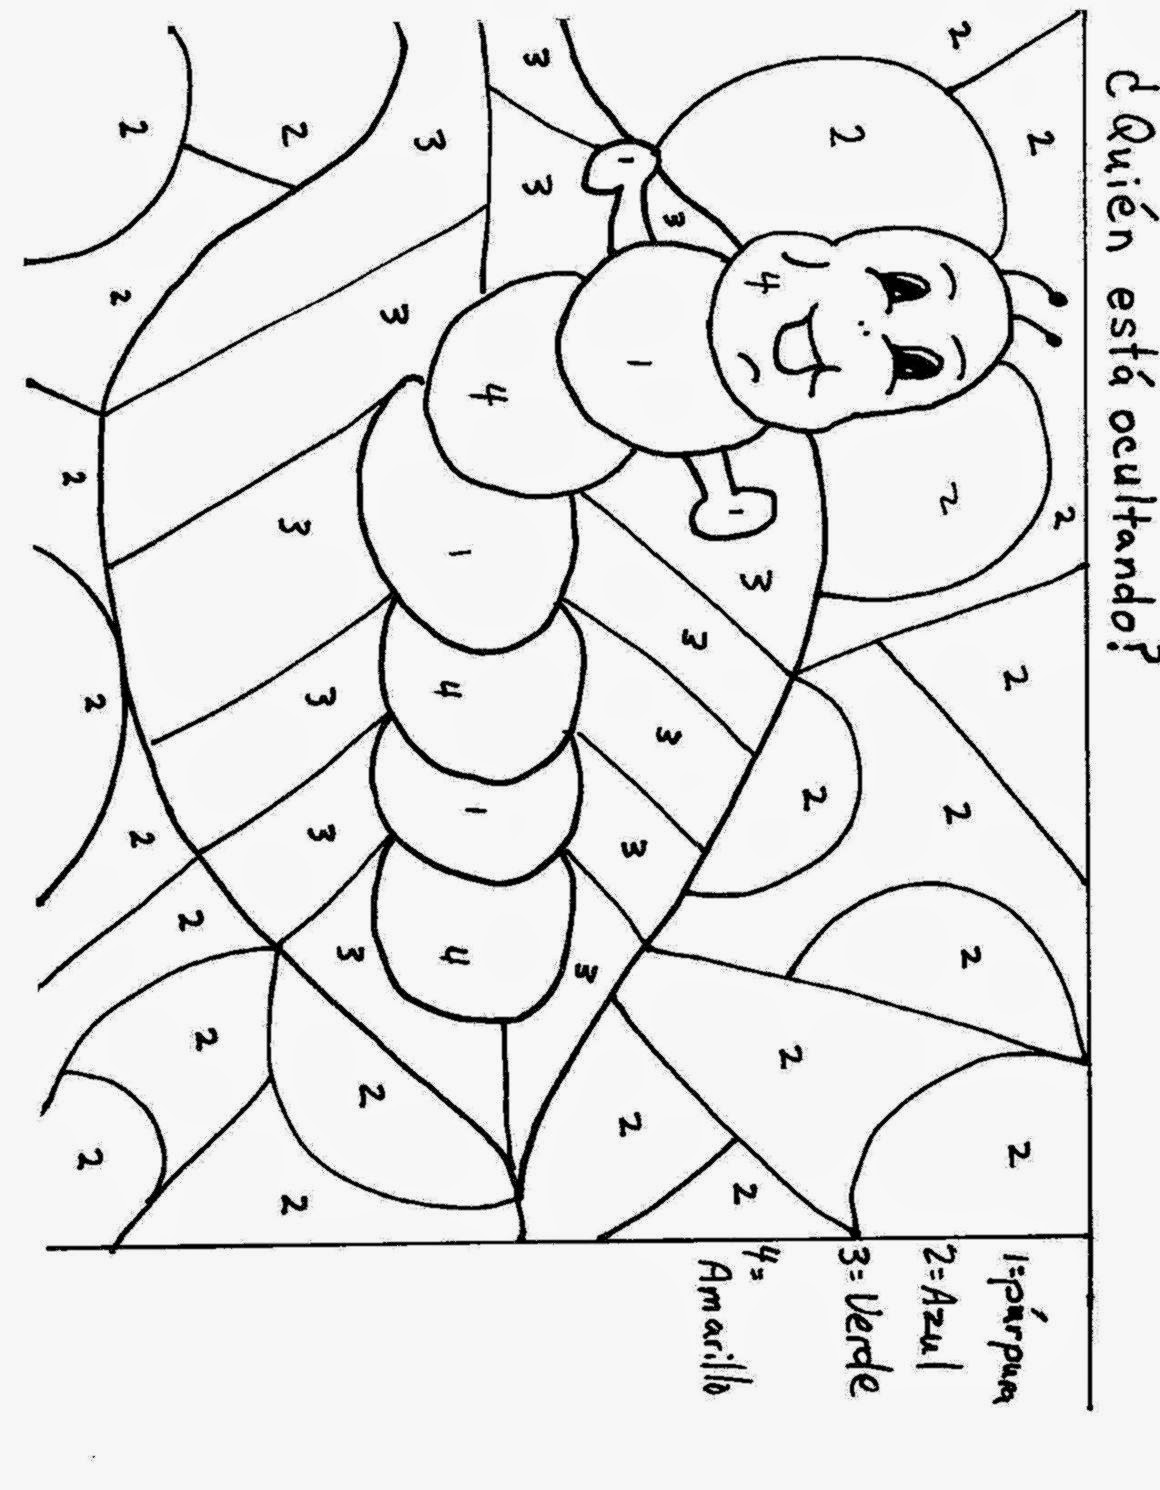 Spanish Numbers Coloring Pages at Free printable